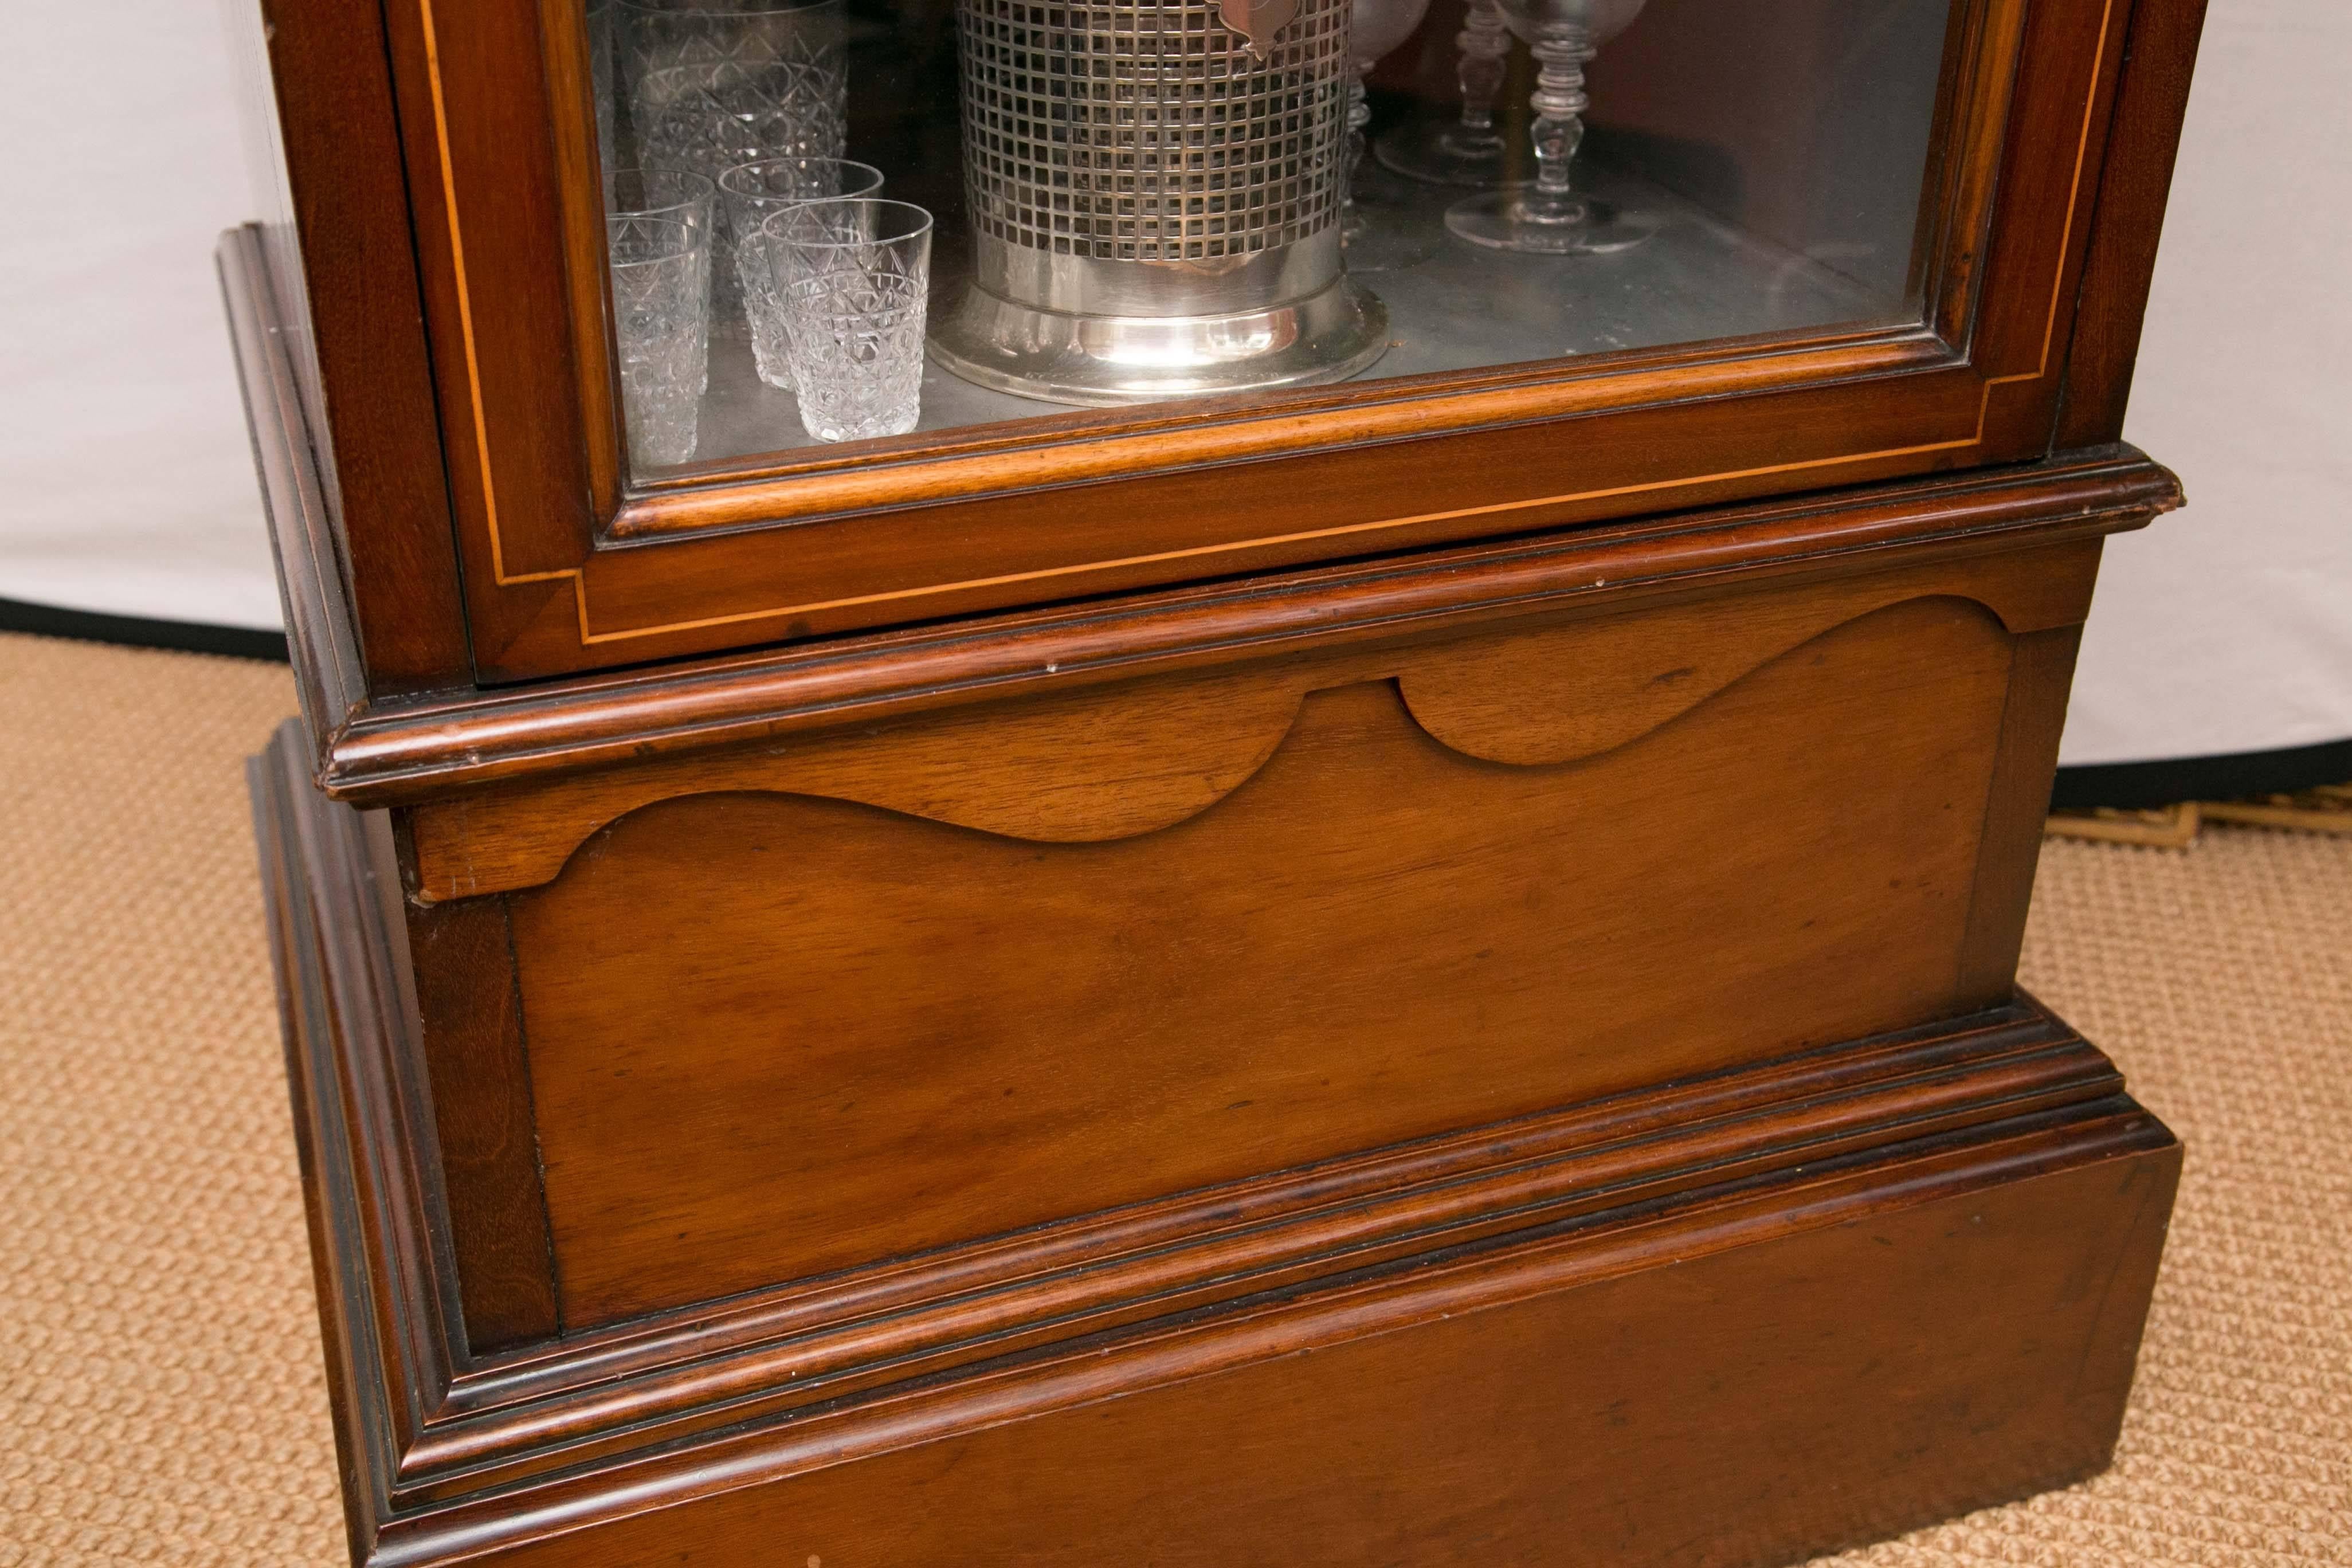 1920s Mahogany Dry Bar, Complete with Humidor and Game Compendium 1